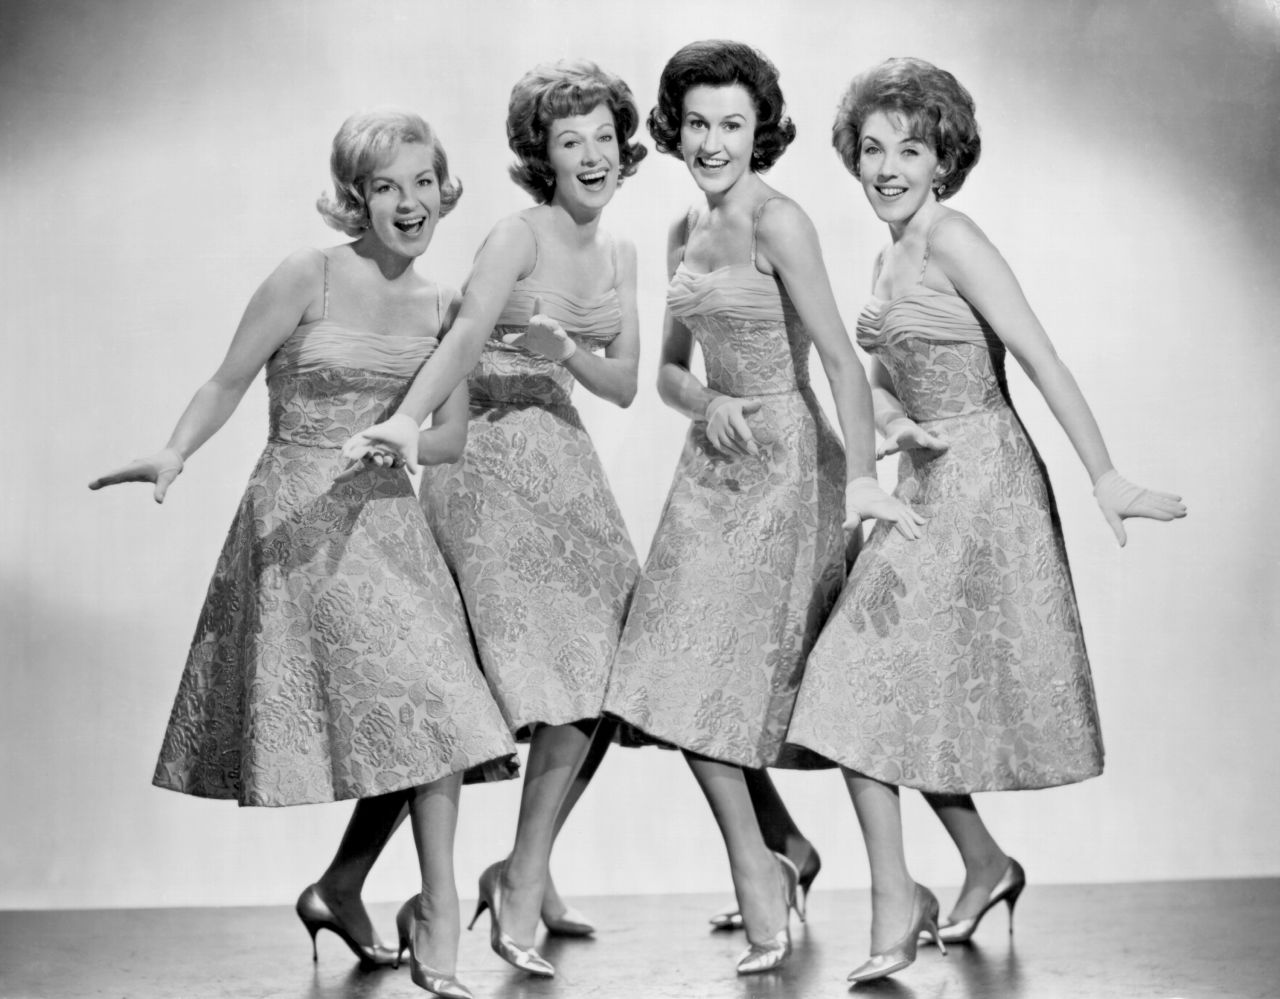 The Chordettes, an all-female a cappella group founded by the daughter of a barbershop singer, topped the pop charts in 1954 with a dreamy tune, "Mr. Sandman," featuring dulcet four-part harmonies. The group scored a second smash hit with their 1958 take on the Ronald & Ruby song, "Lollipop."    